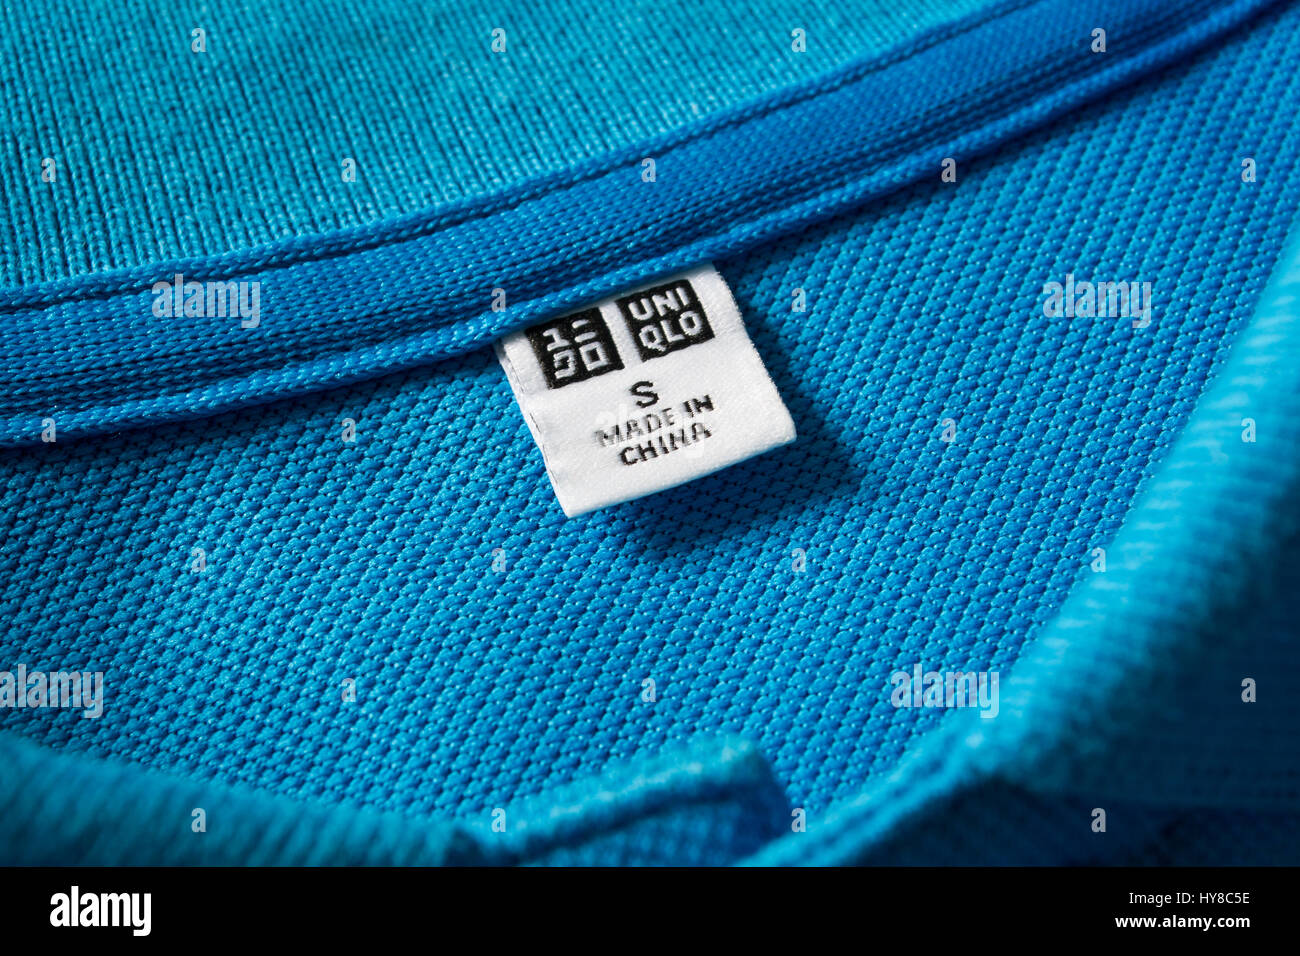 Bangkok, Thailand - August 2, 2017 : Label tag on Uniqlo shirt shows that  the item is made in China Stock Photo - Alamy